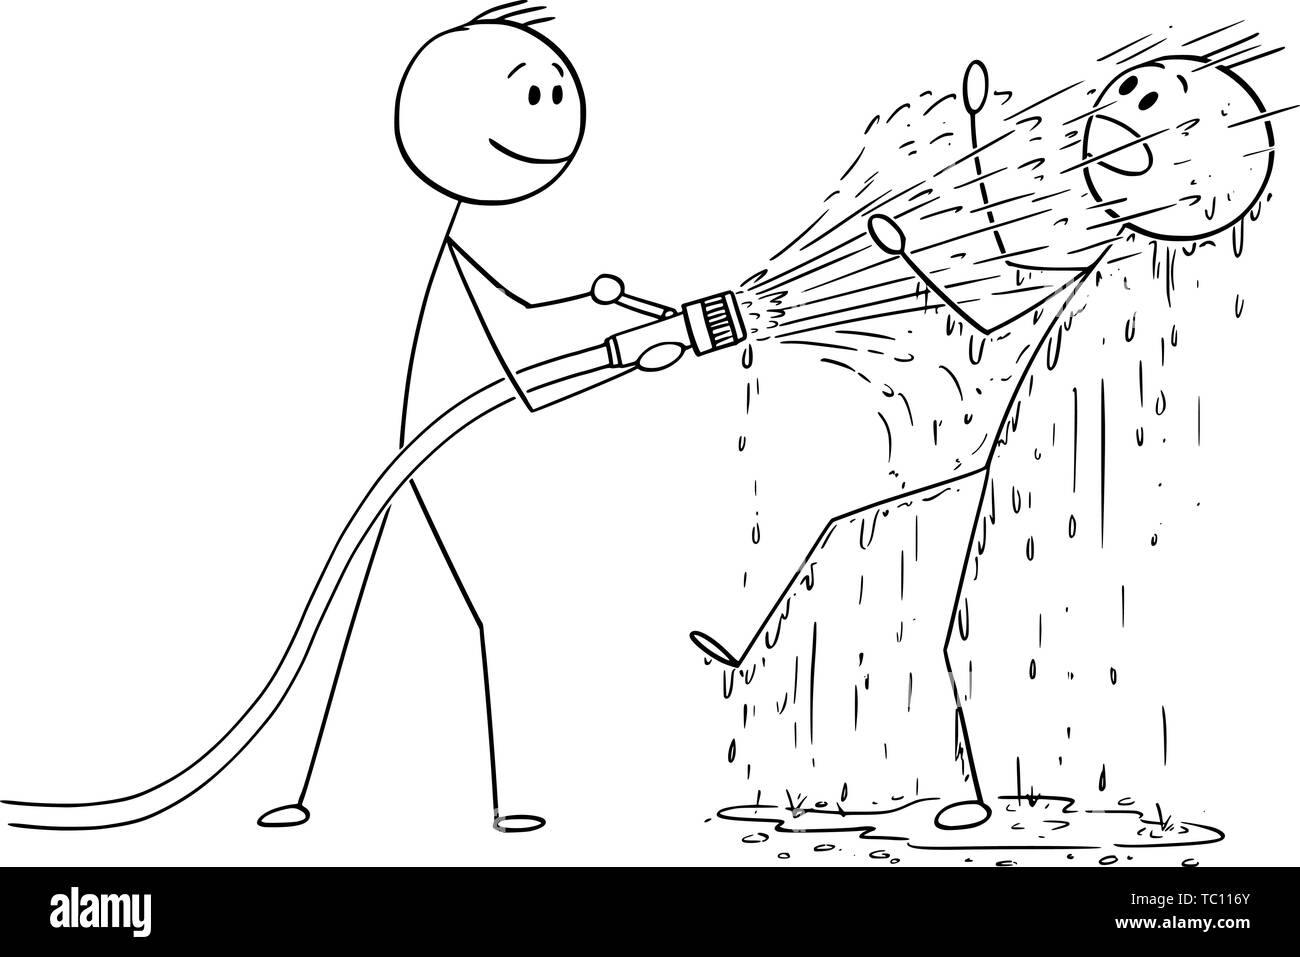 Vector cartoon stick figure drawing conceptual illustration of man or businessman holding big fire hose and shooting water on another man who is completely wet. Stock Vector